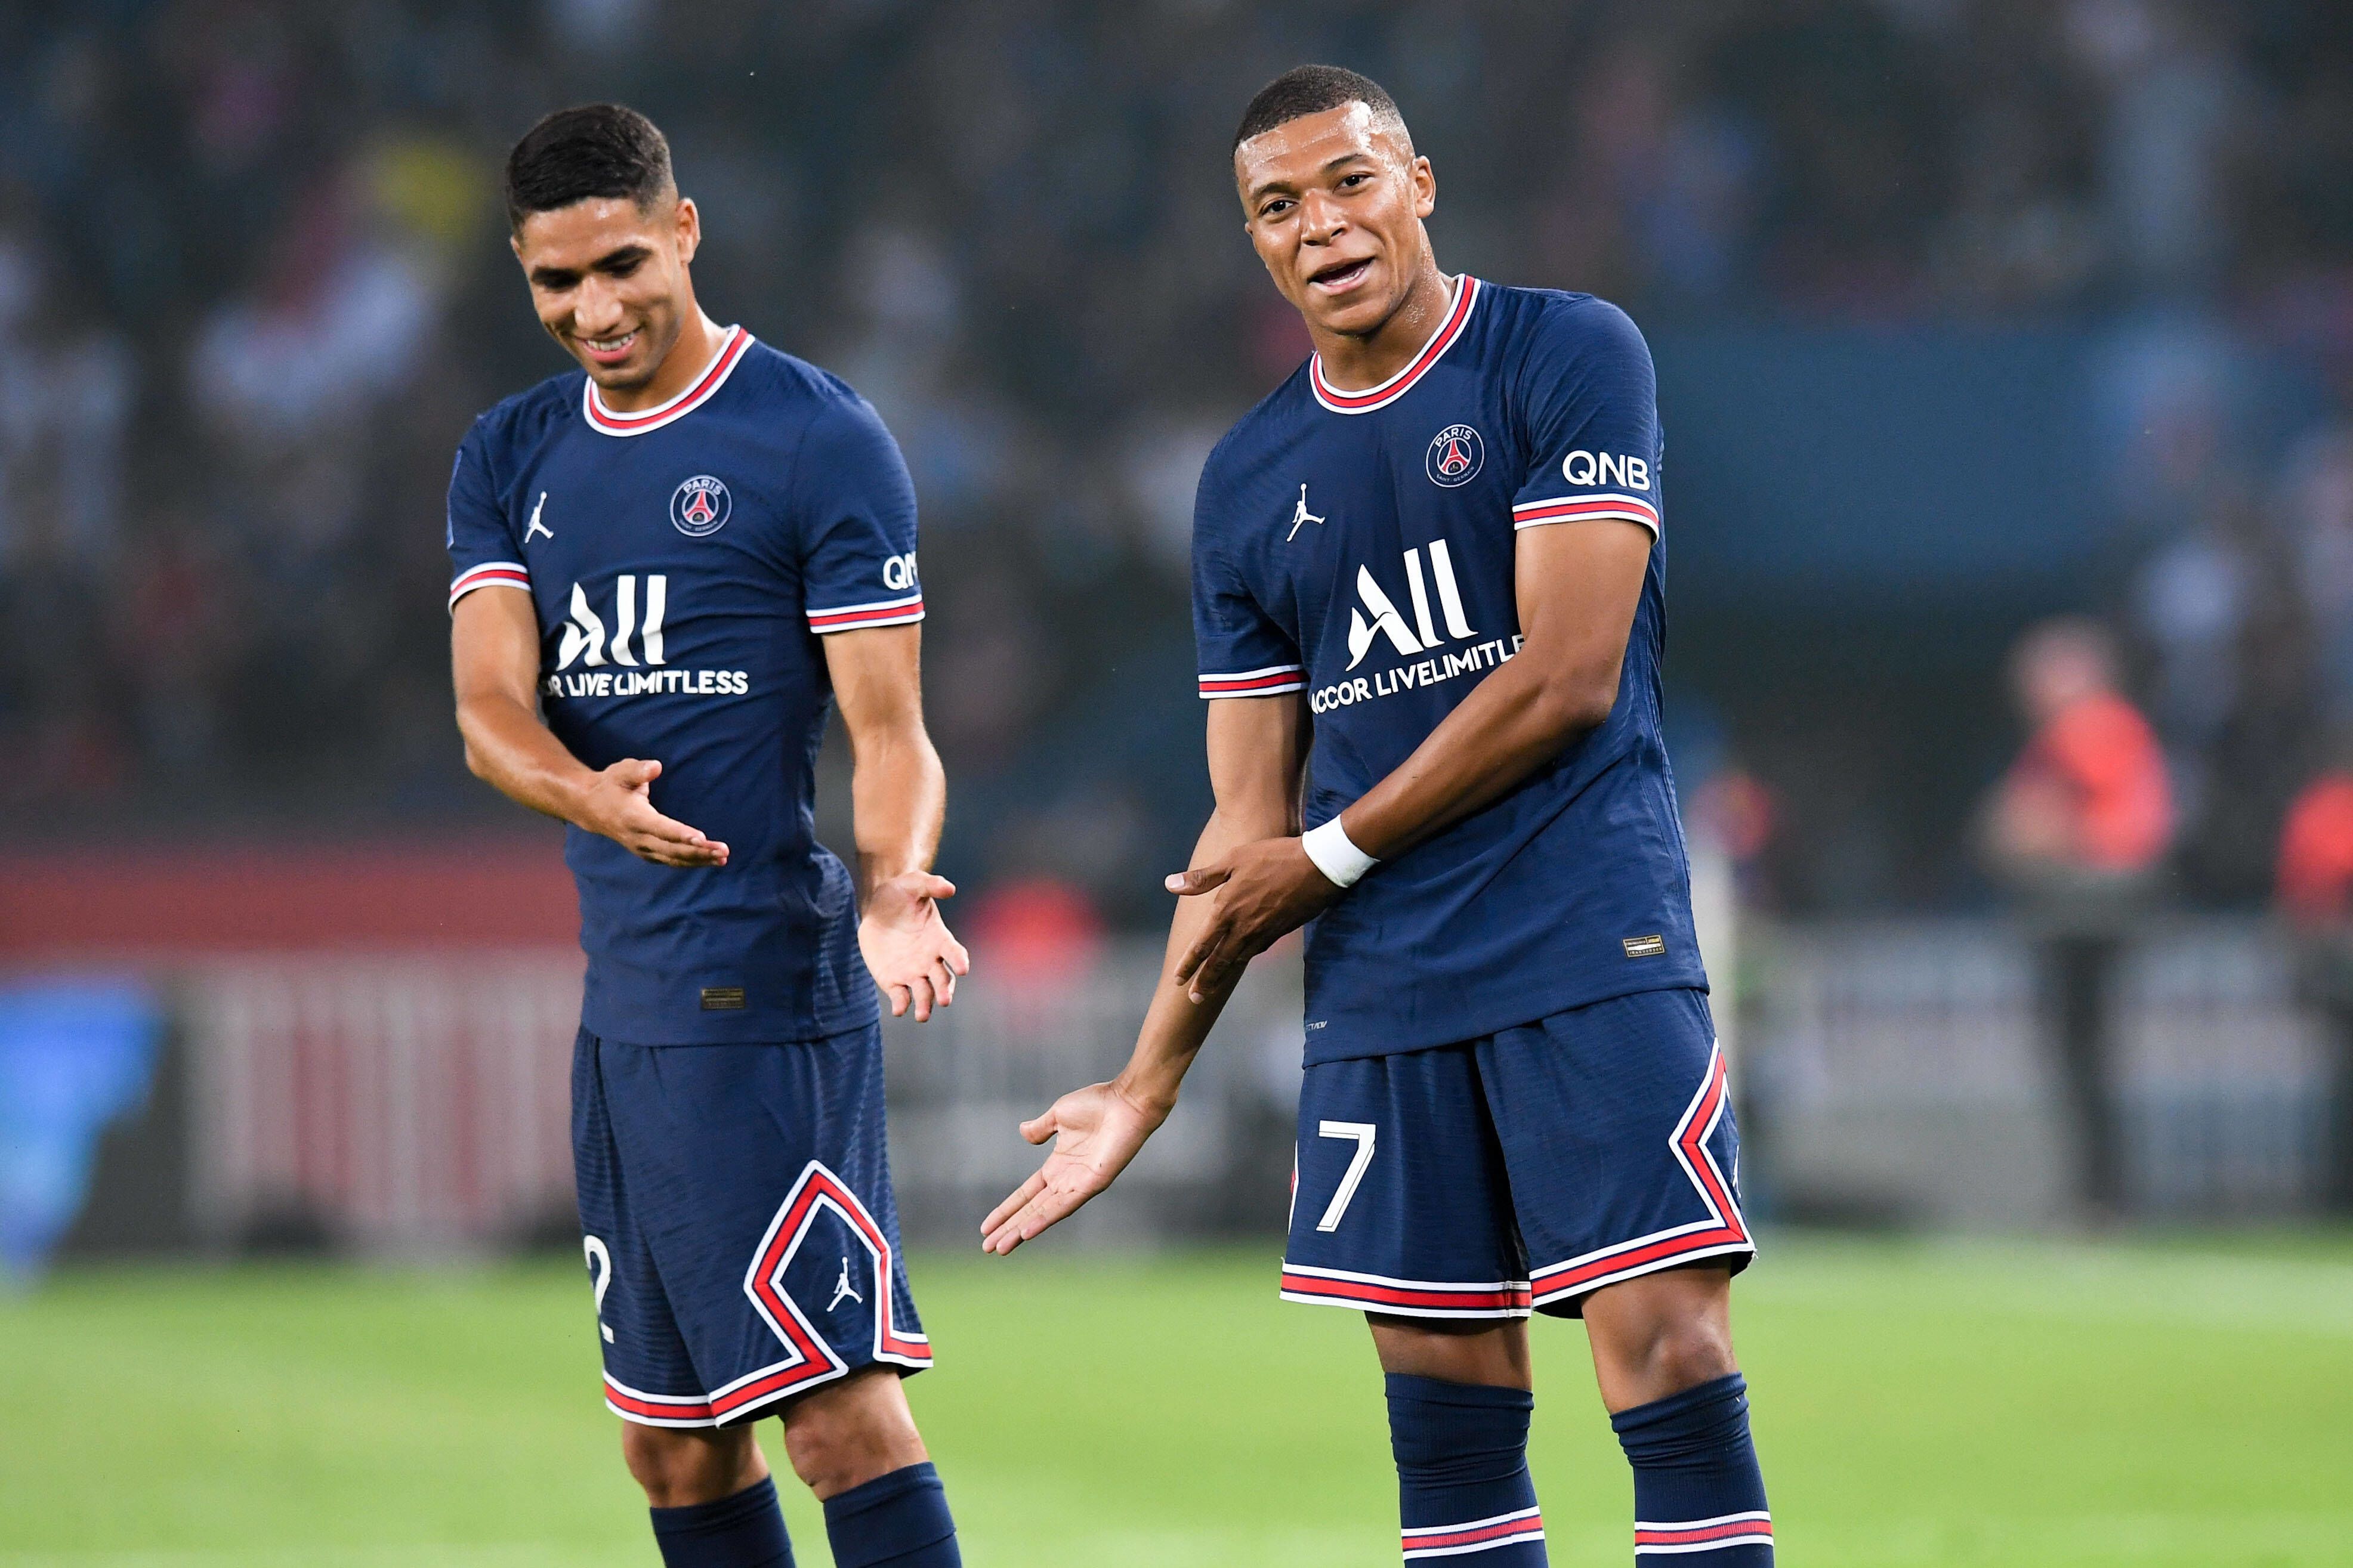 Mbappé says he will move to Real Madrid if the club brings back Hakimi